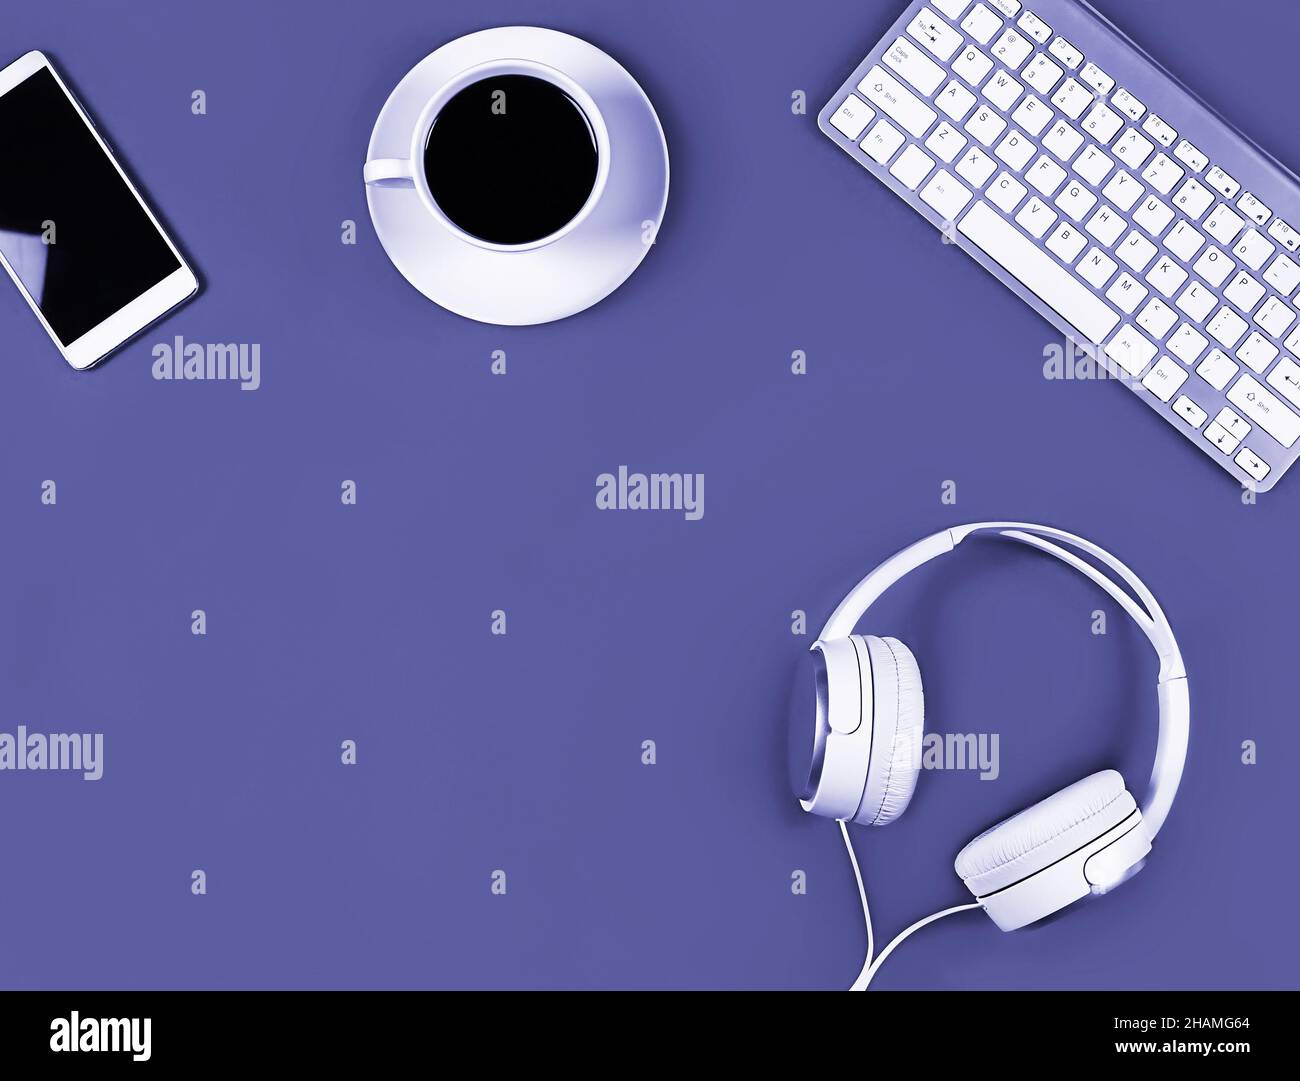 Flat layout on very peri lavender background. Horizontal photo. Composition concept online conference, desktop, office work and training, concept bloging, online education. Stock Photo